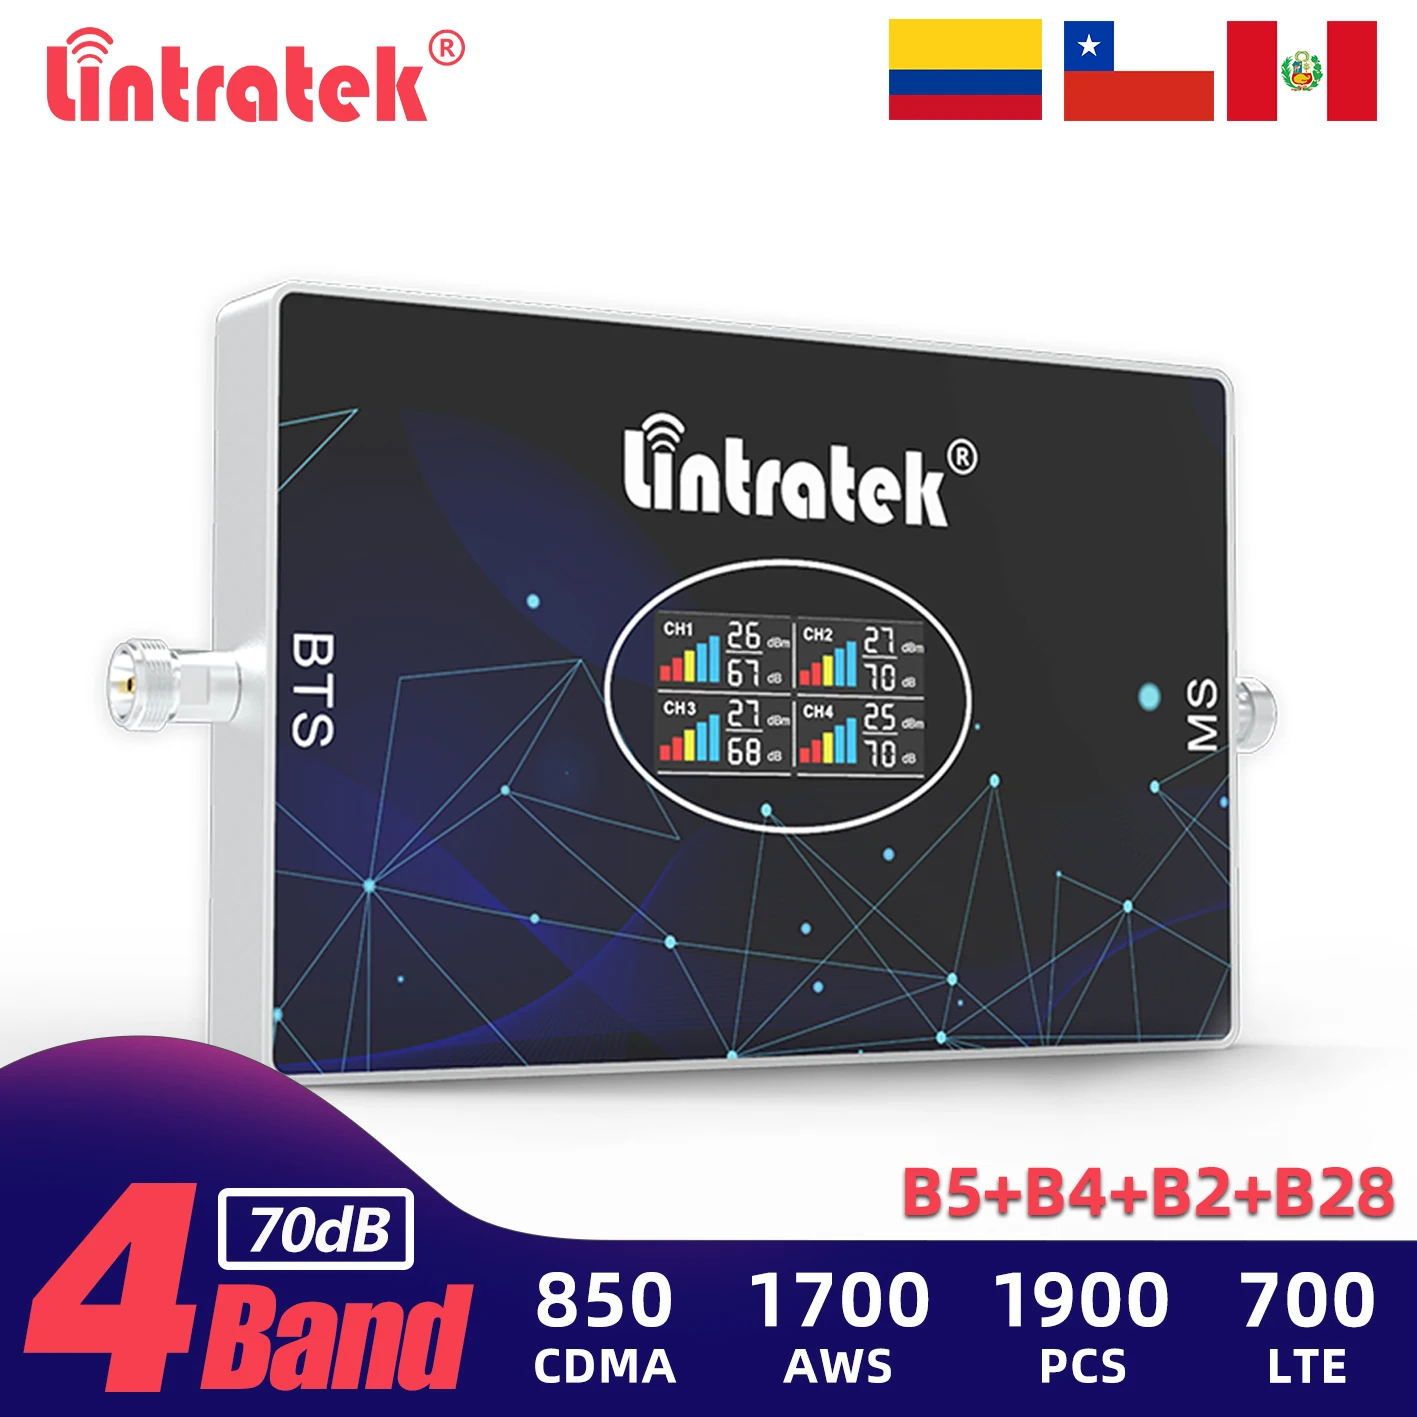 Lintratek Four-Band Signal Repeater 850 700 1900 1700 Band 28 Cellular Booster 2G GSM 3G 4G LTE Cell Phone Network Amplifier gates wide angle band 2 7m and 3 7m， perimeter 1030 1060 1090 1120 1150 1180 1220 1280 1320 1360 1450 1500 1600 1650 1700 2300mm